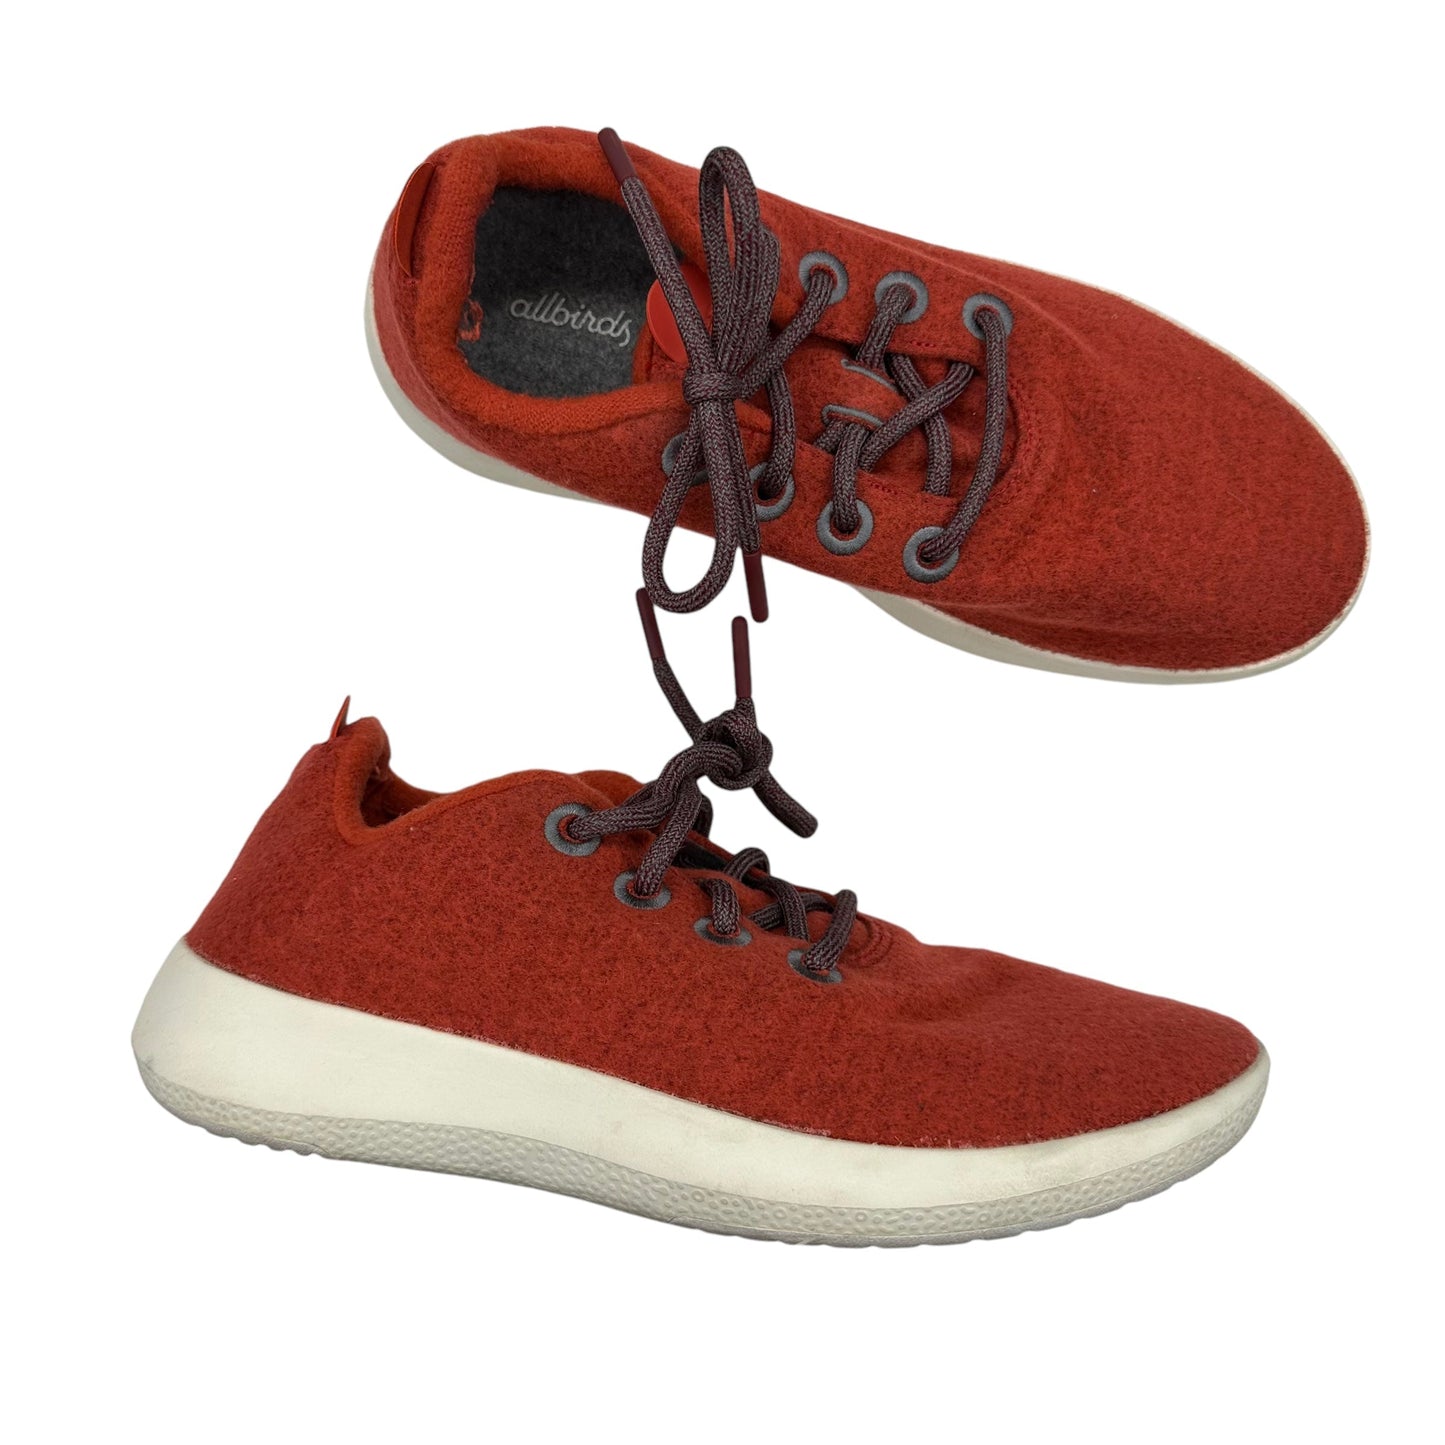 Shoes Sneakers By Allbirds  Size: 10